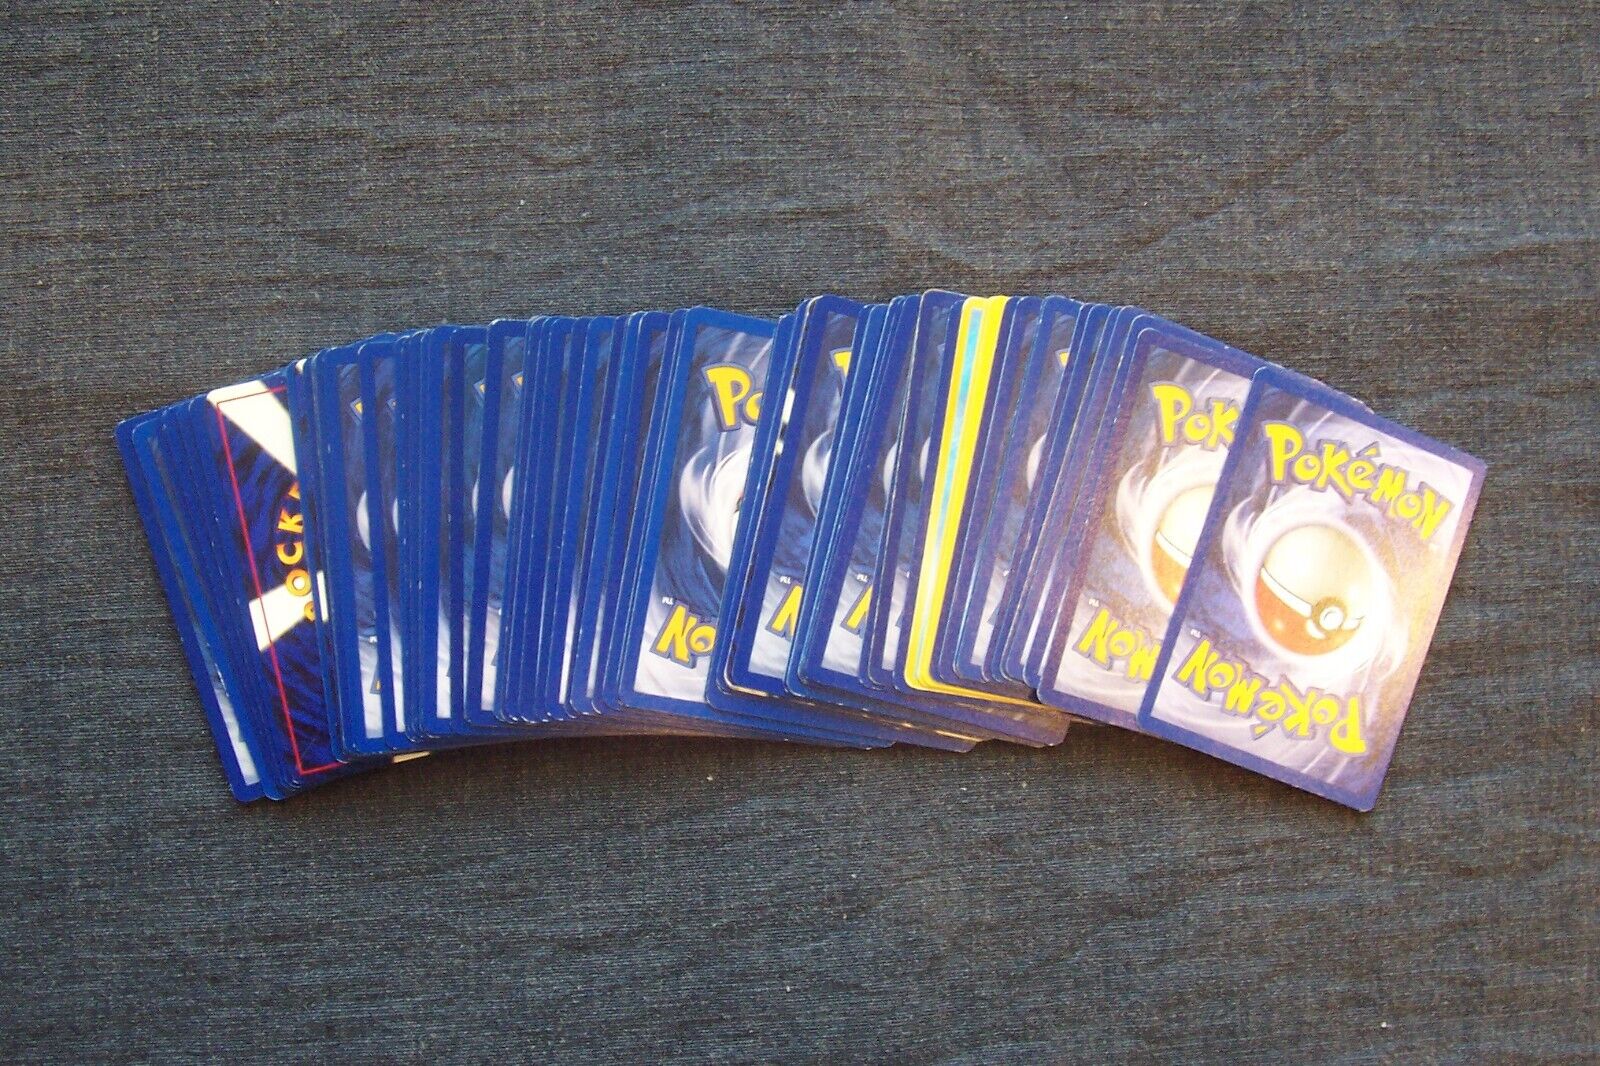 Here is a lot of 76 Pokémon cards - all in excellent condition, value unknown